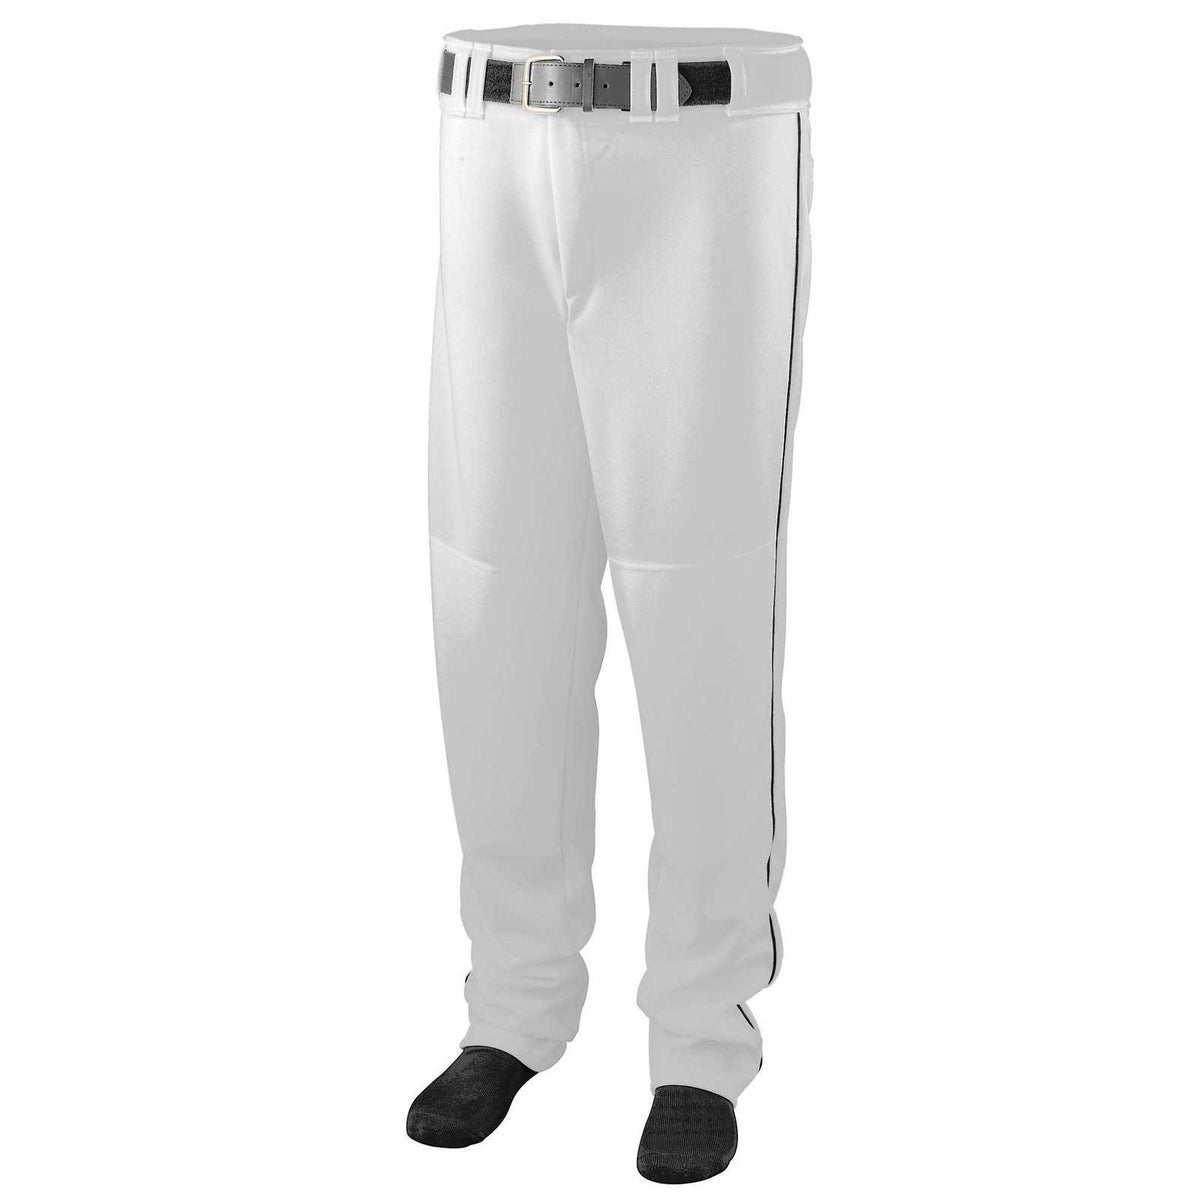 Augusta 1446 Series Baseball Softball Pant with Piping Youth - Wh Bk - HIT a Double